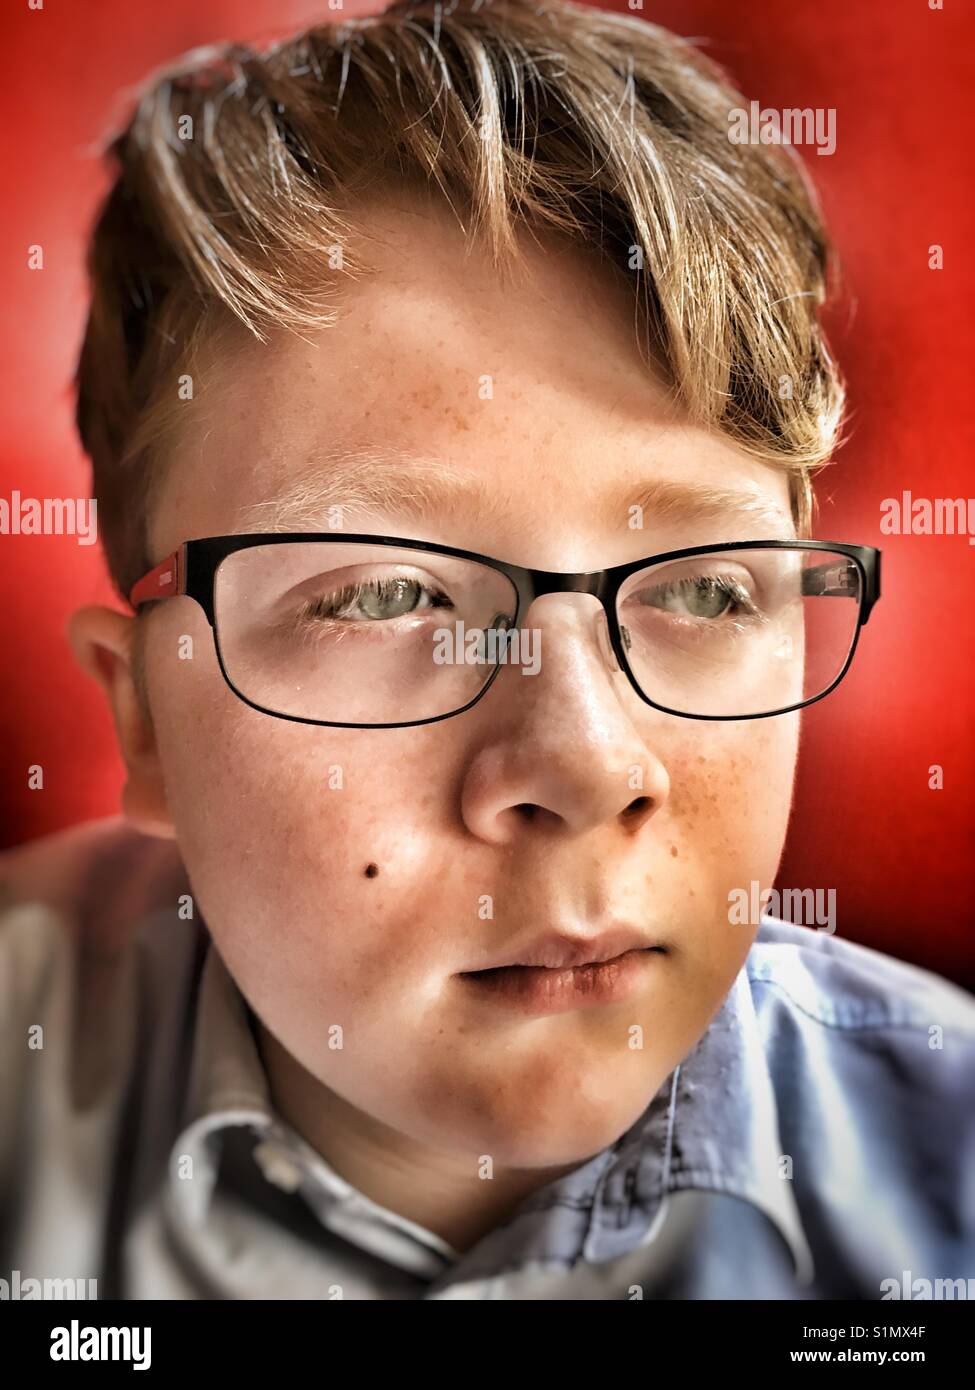 Ginger haired boy wearing glasses Stock Photo